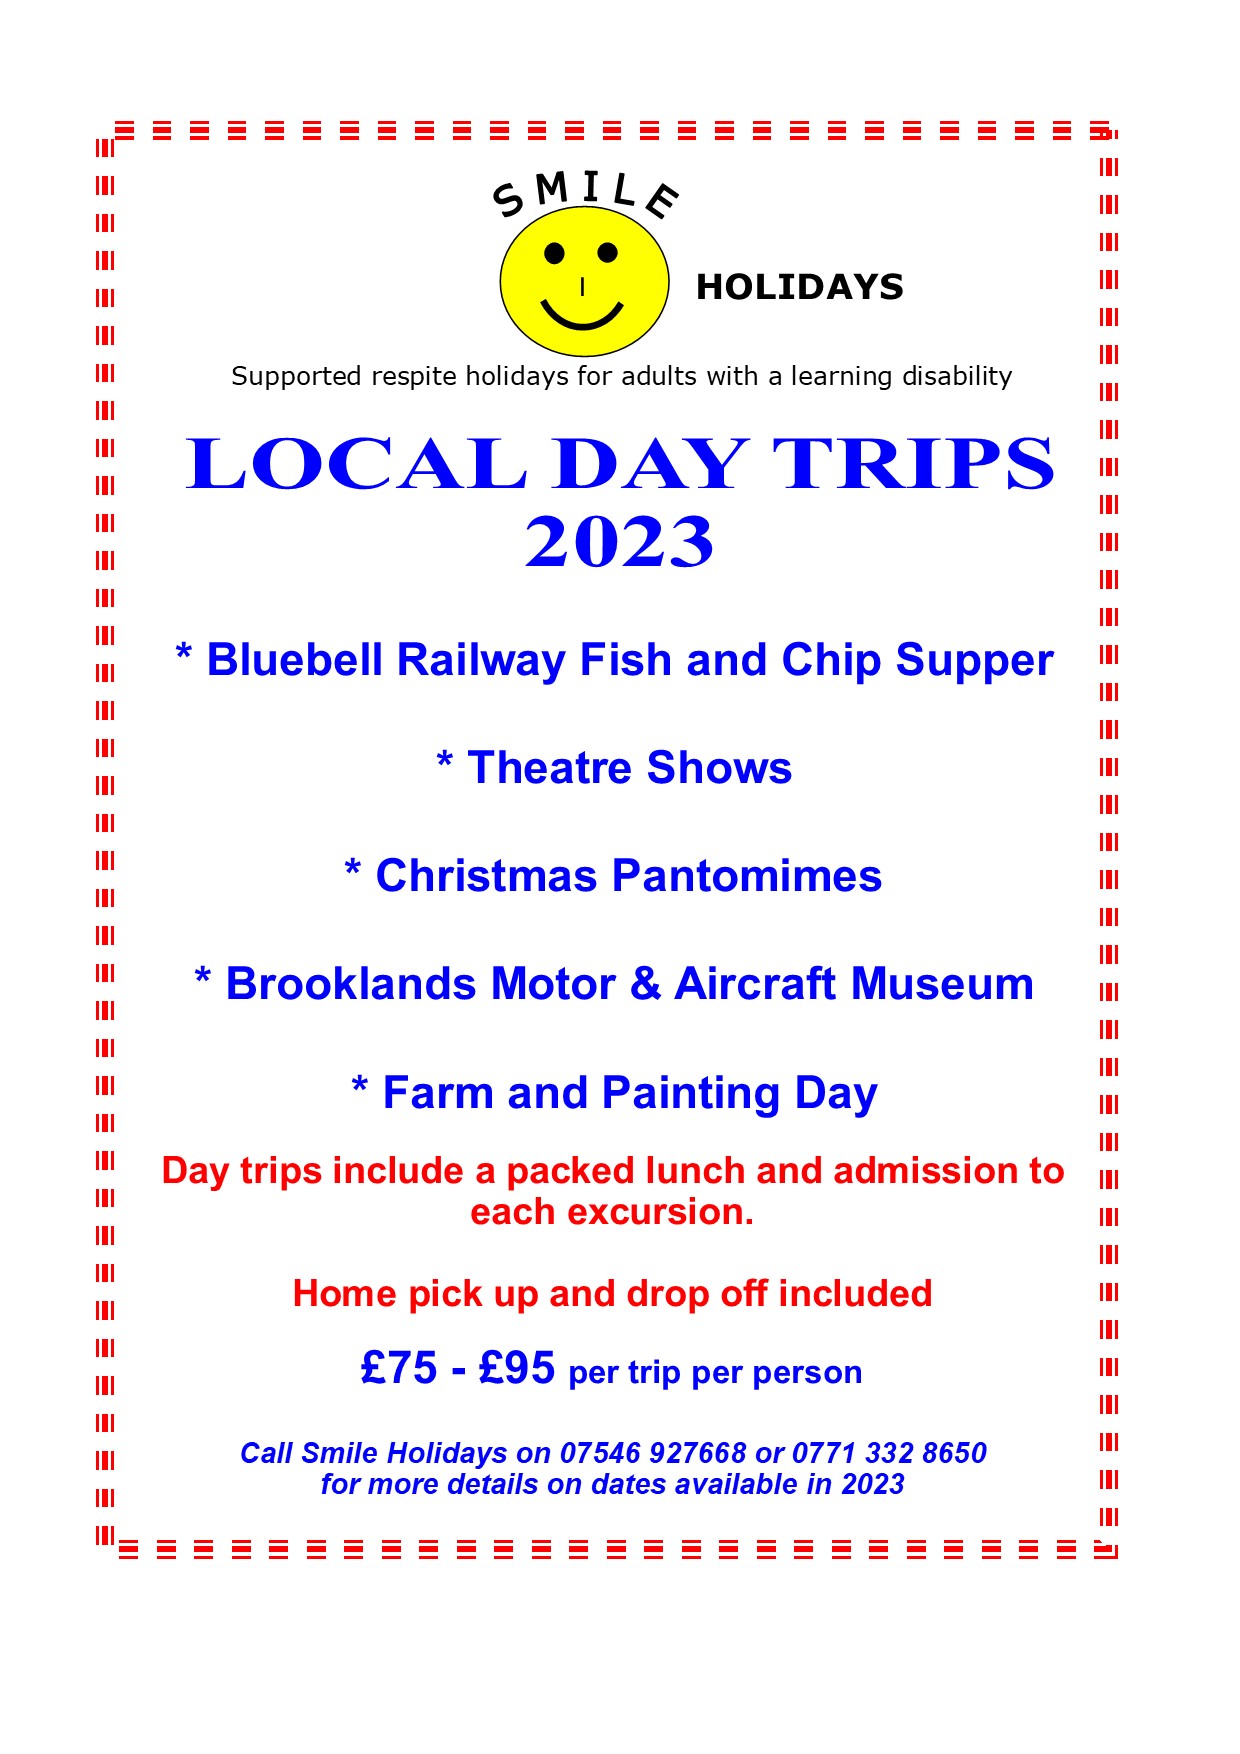 Local Day Trips from Brighton  from Smile Holidays 2023